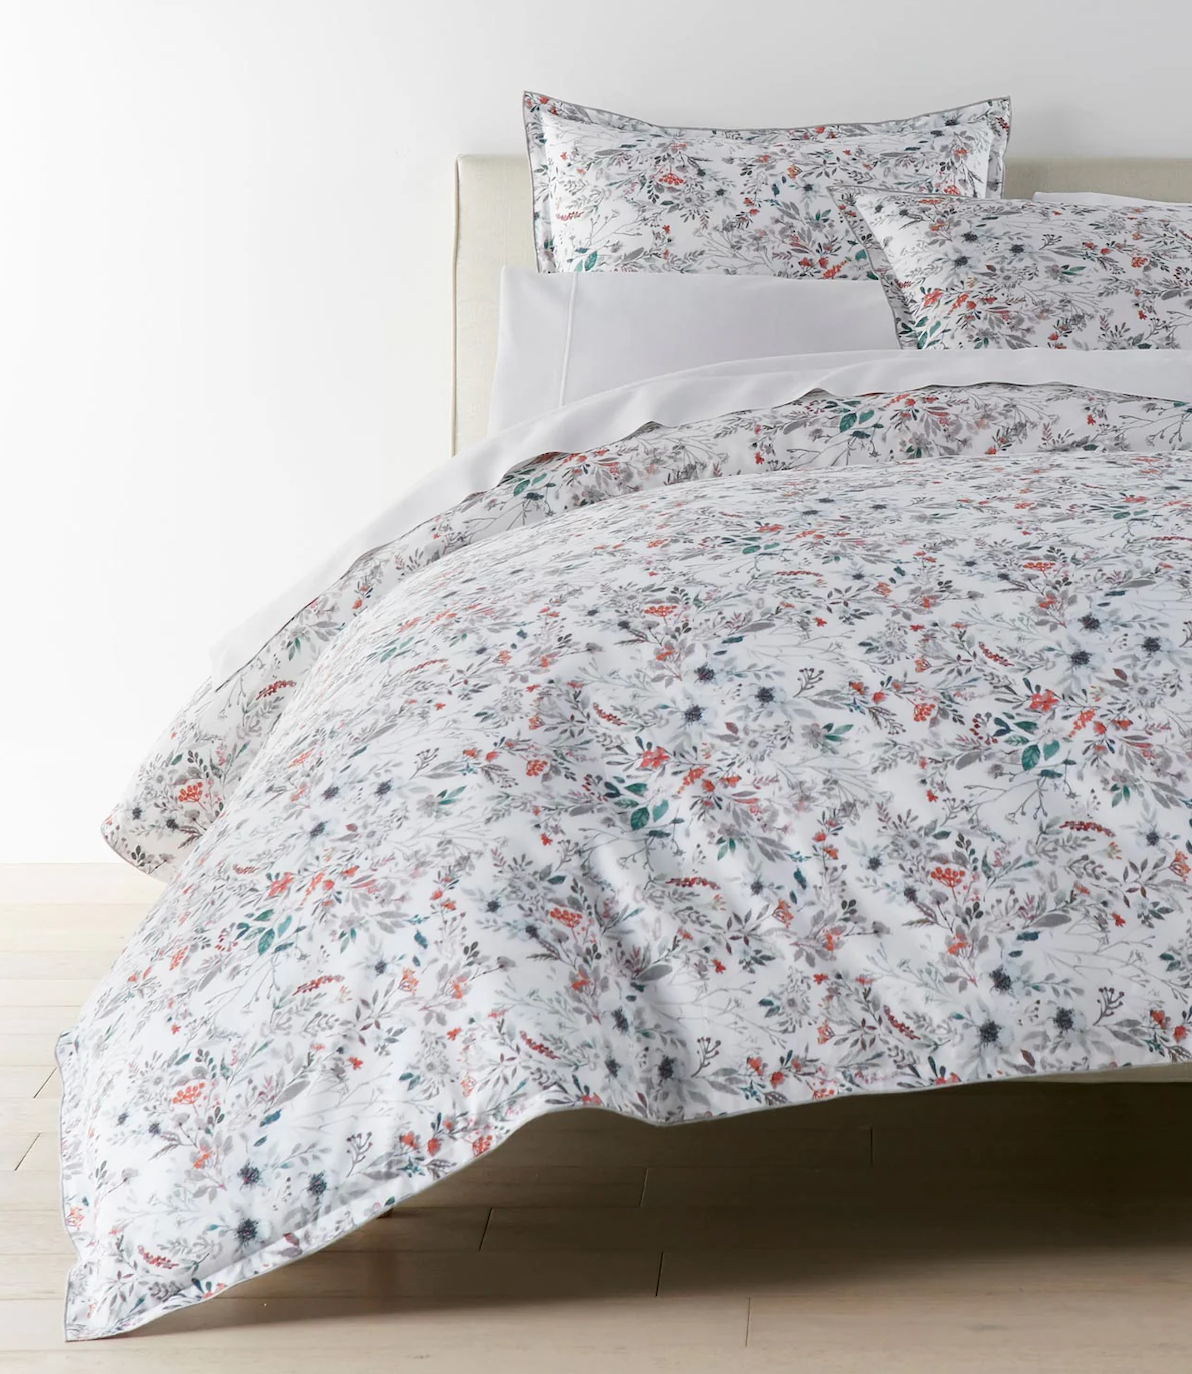 Chloe cotton duvet covers by Peacock Alley